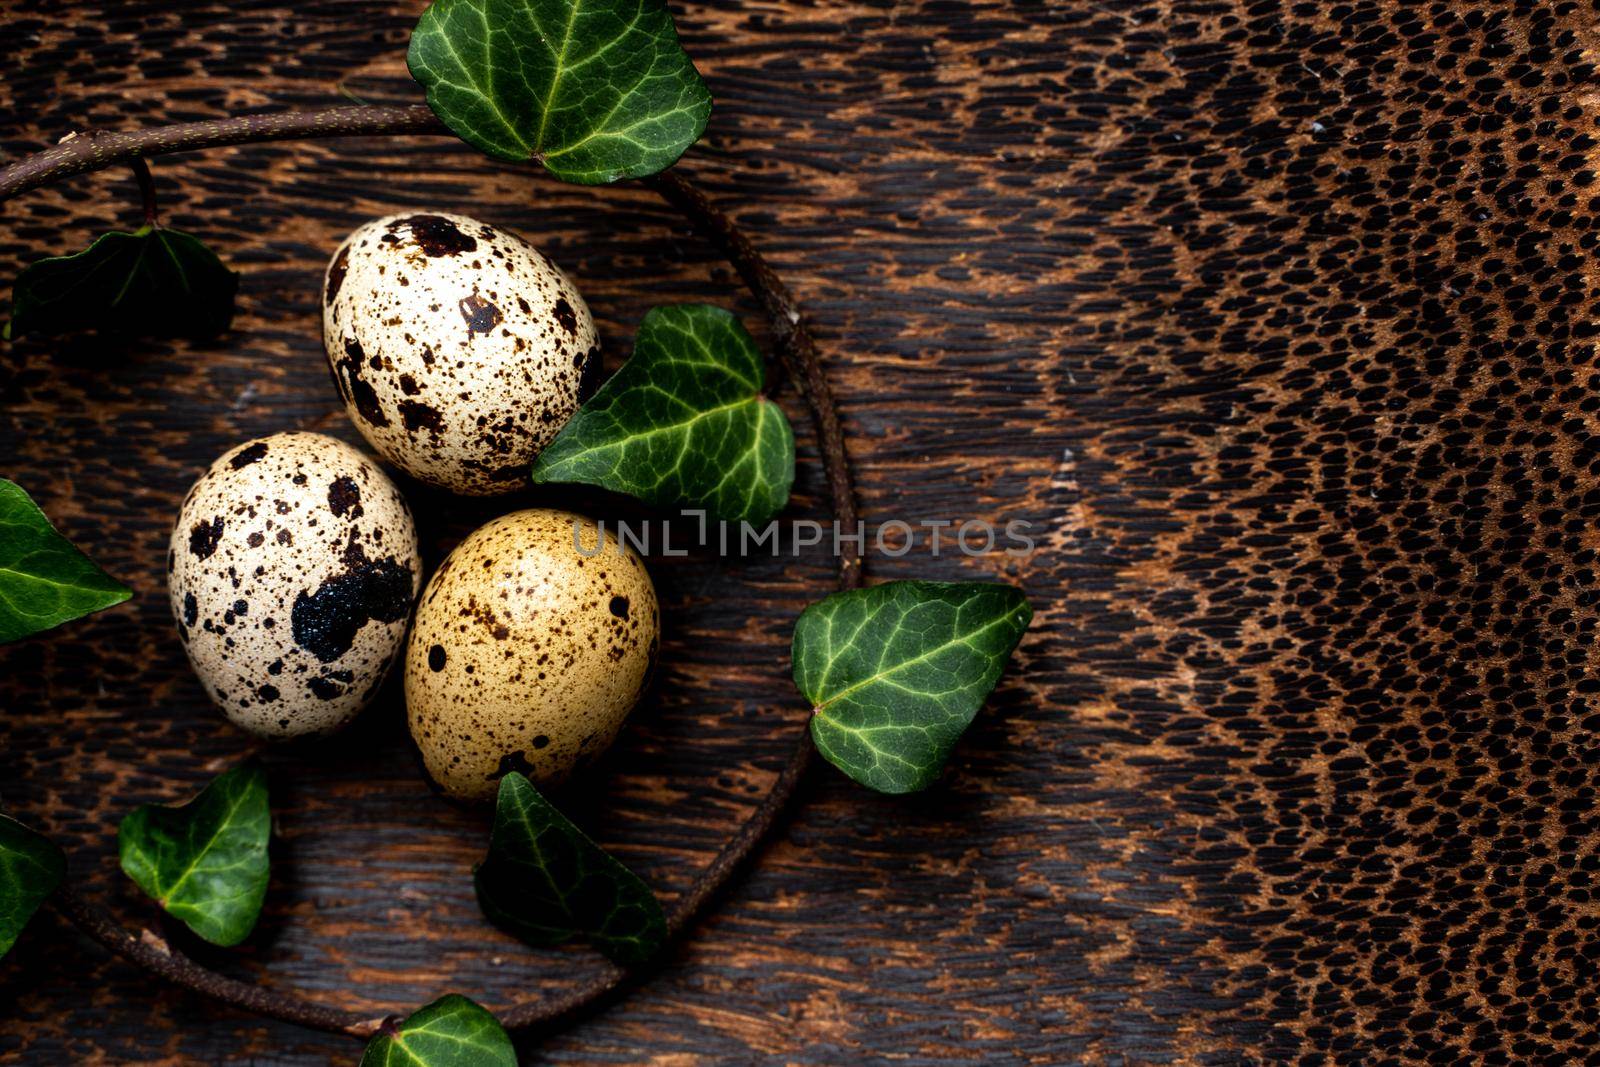 three quail eggs on a wooden stand. Palm tree stand. Around the eggs is a sprig of ivy